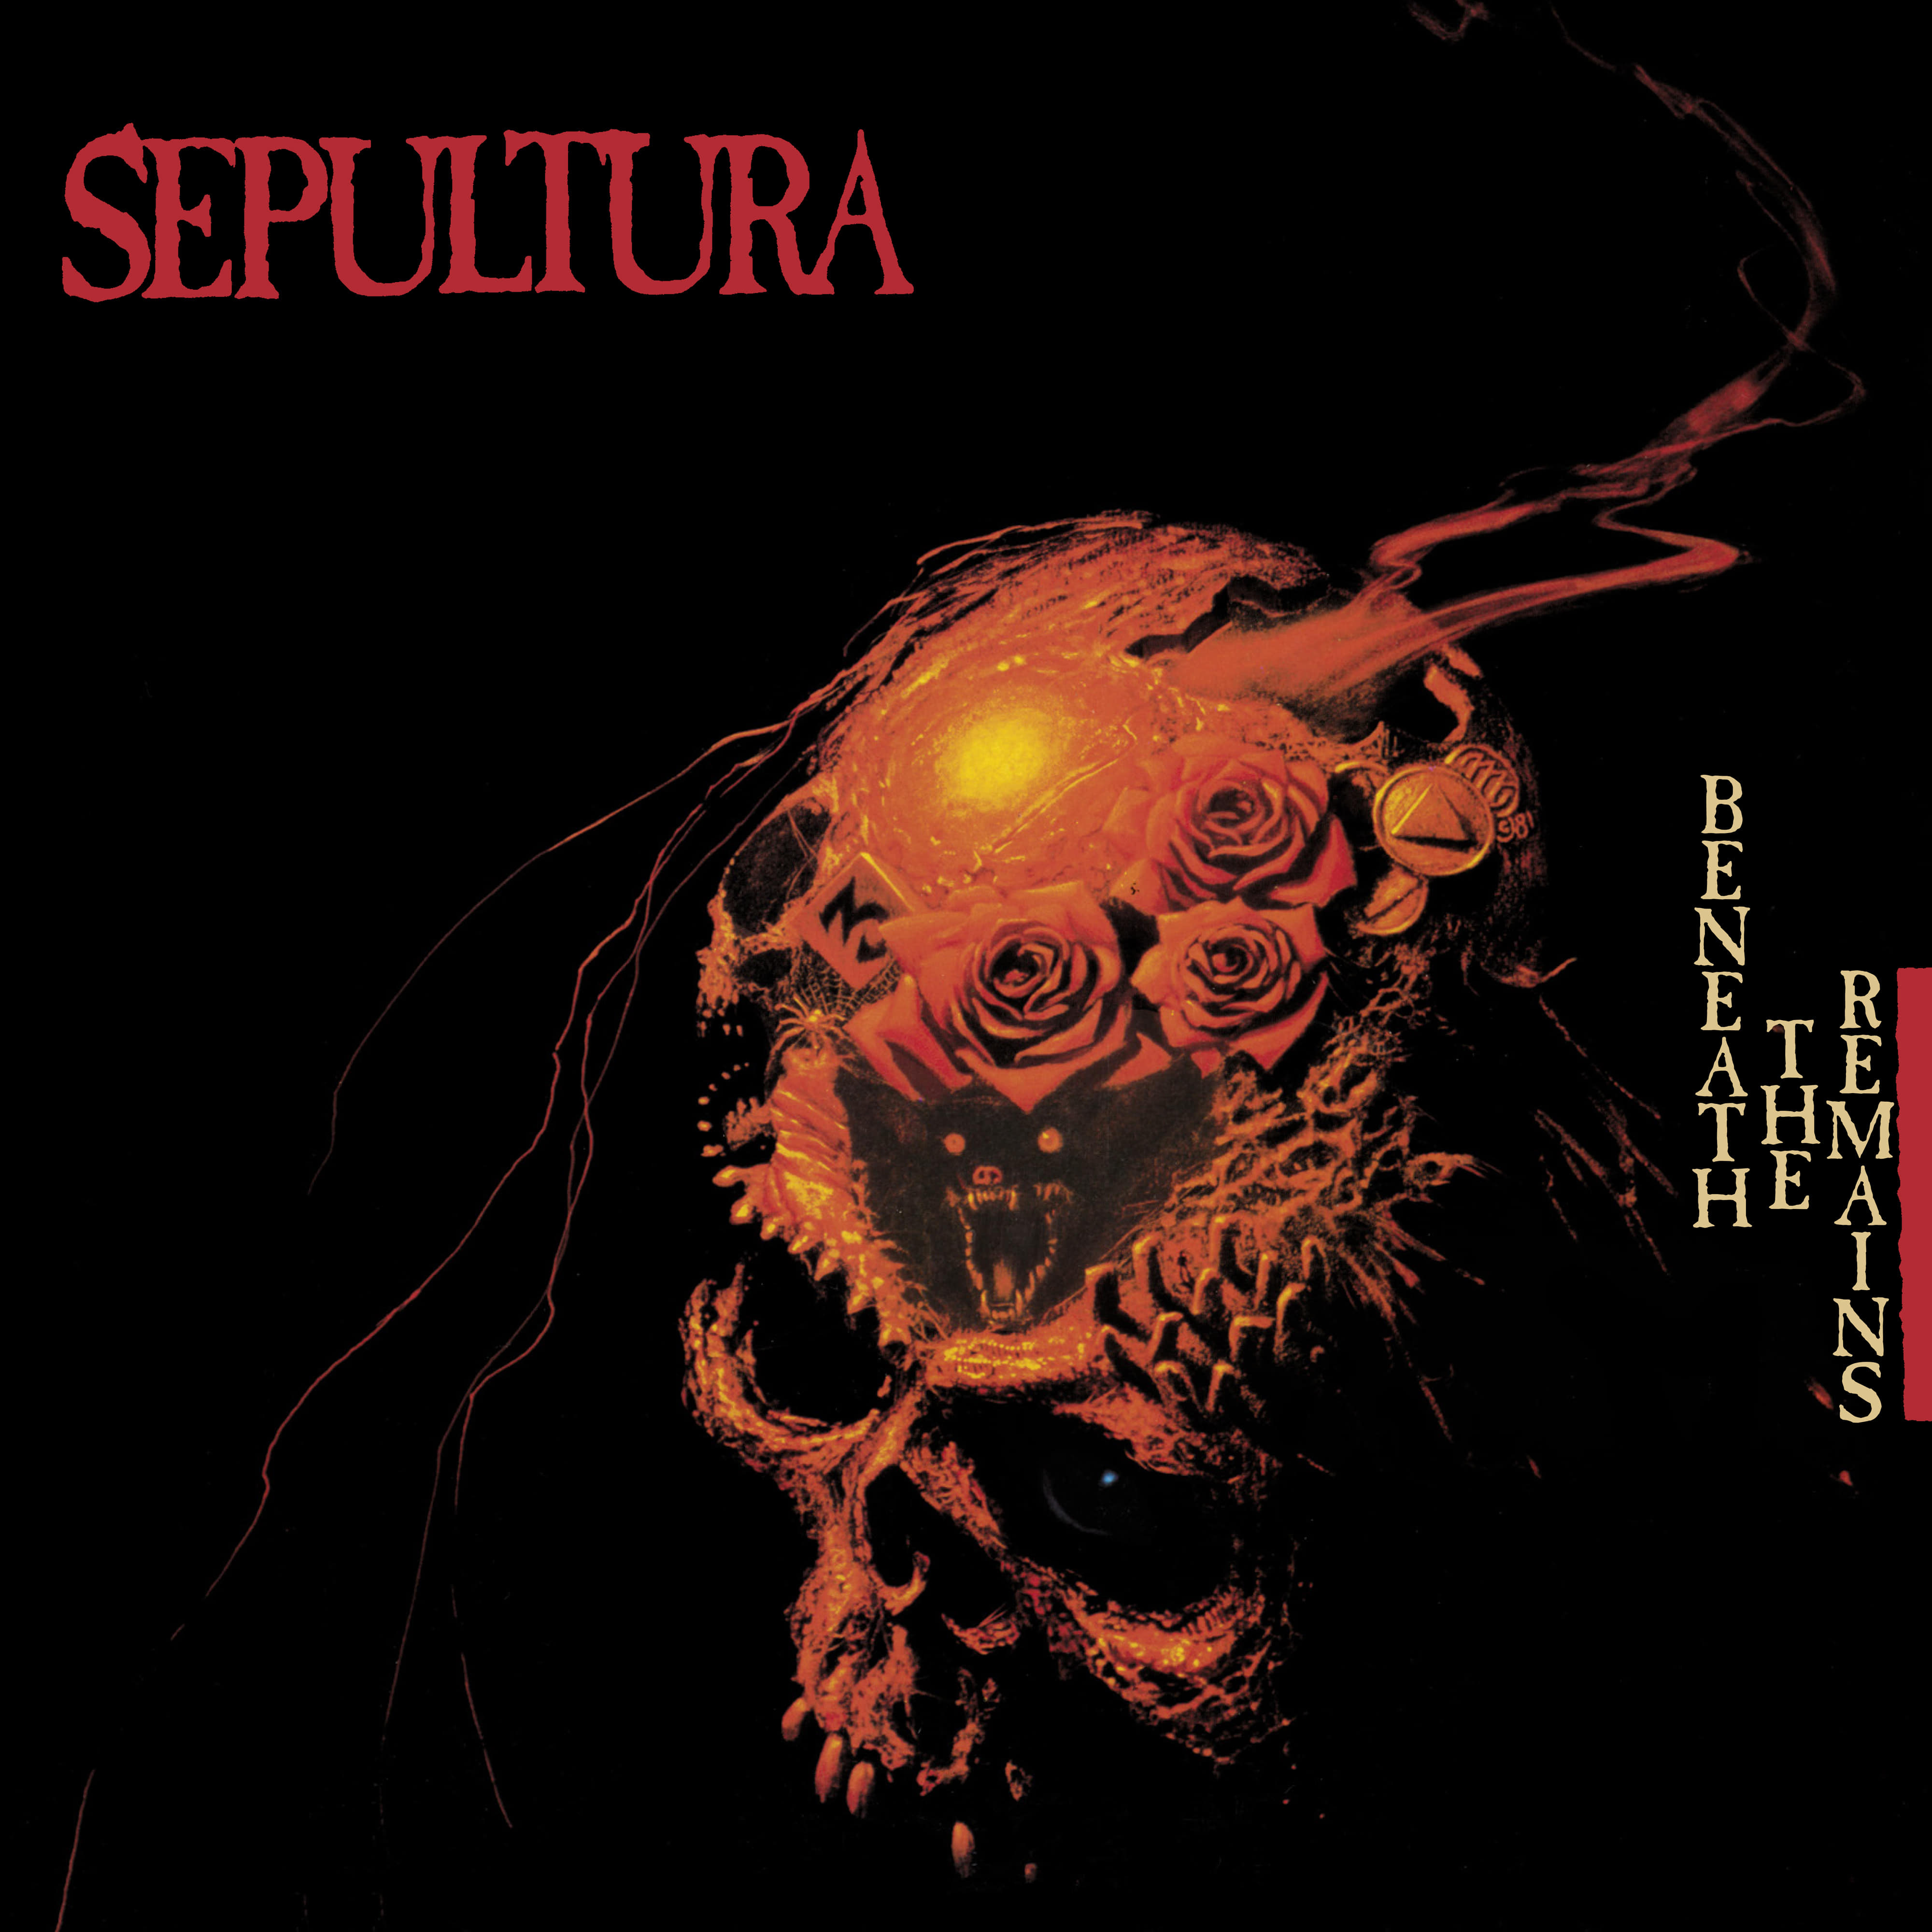 Sepultura-Stronger Than Hate (2020 Remaster)